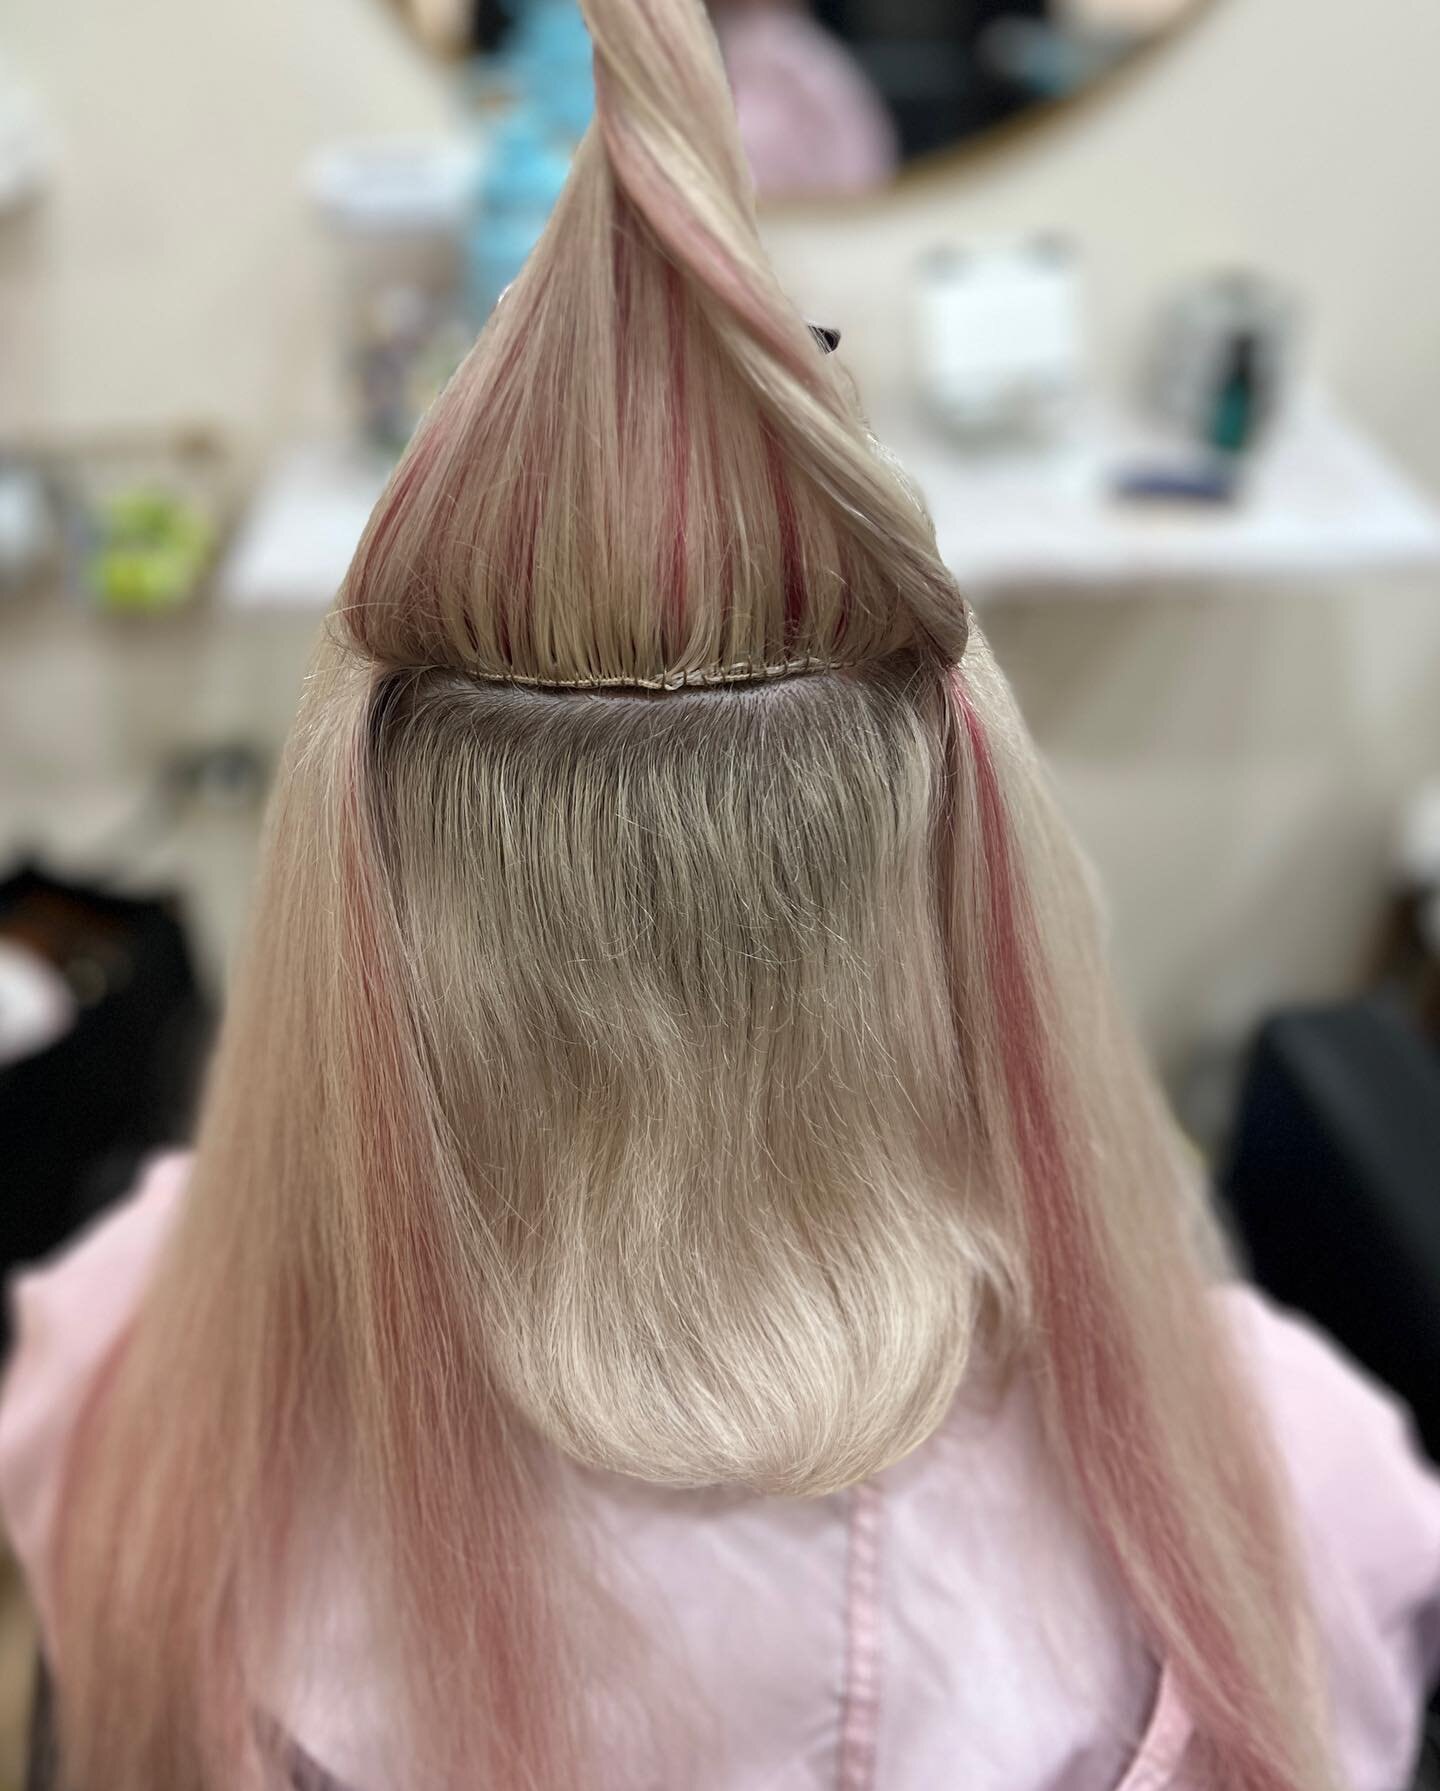 Perfectly pink 🌸

✨2 rows @invisiblebeadextensions with custom colored pink pastel weft!

#flexibleweft #braidlesssewin #hiddenbead #extensions #hairextension #machineweft #handtiedweft
 #friscosalon #friscohairsalon #friscoextensions #friscoextensi